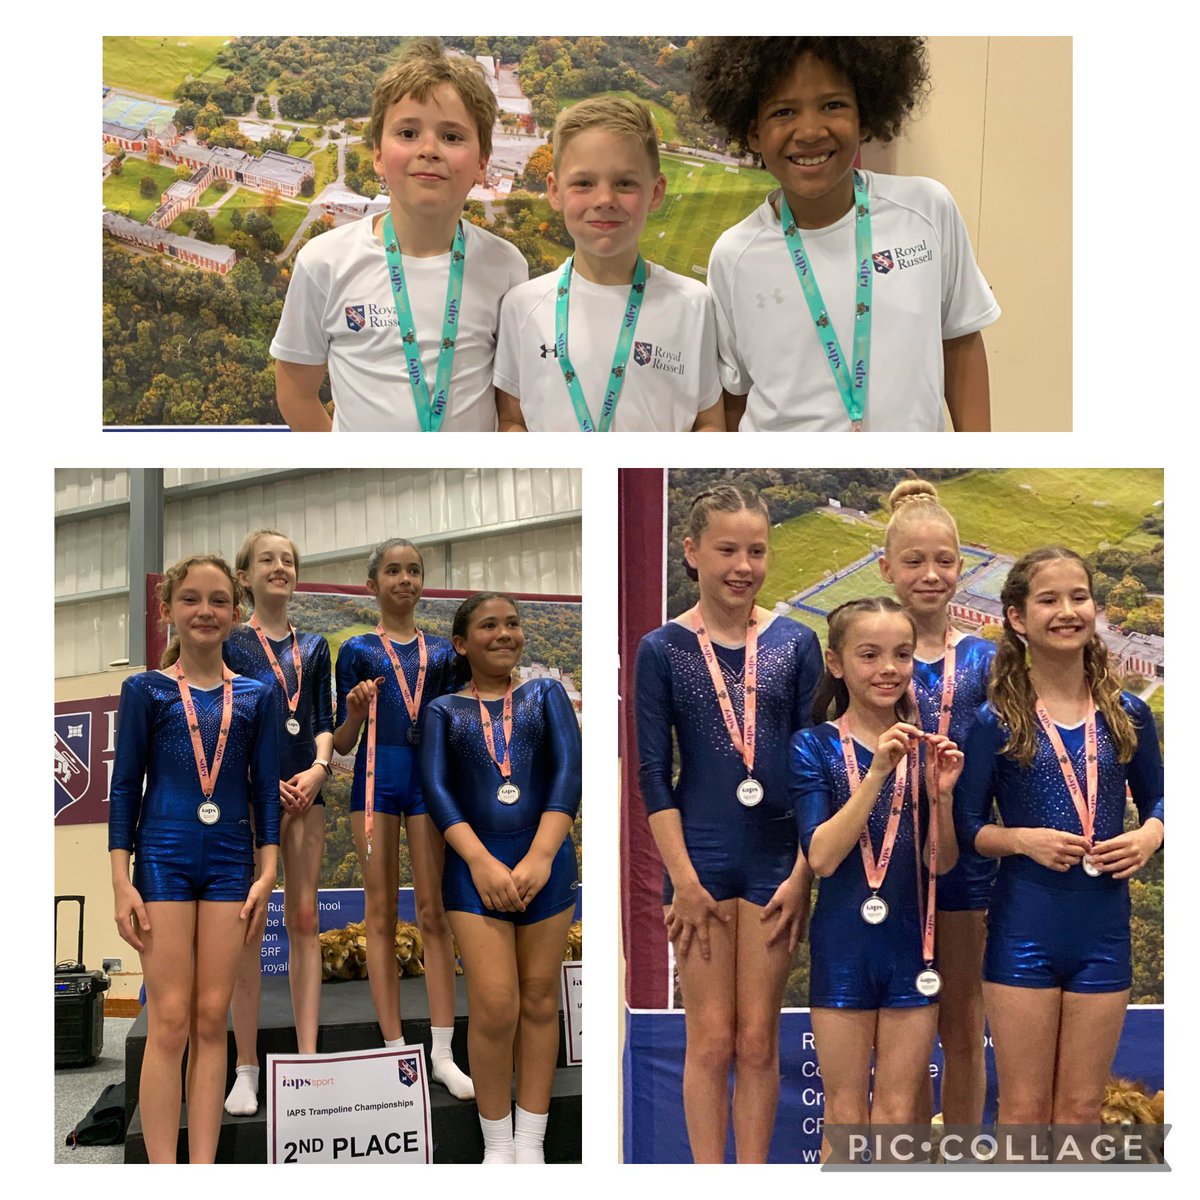 The Trampoline teams picked up lots of medals @iapsuksport National Trampoline Championships 🎉👏 A team competition- U9A Girls National team champions 🏆 U11A Girls🥈 U11 Boys 🥉 B team event U9B Girls B team champions 🥇 U11B Girls 🥈 #medals #nationals #proud